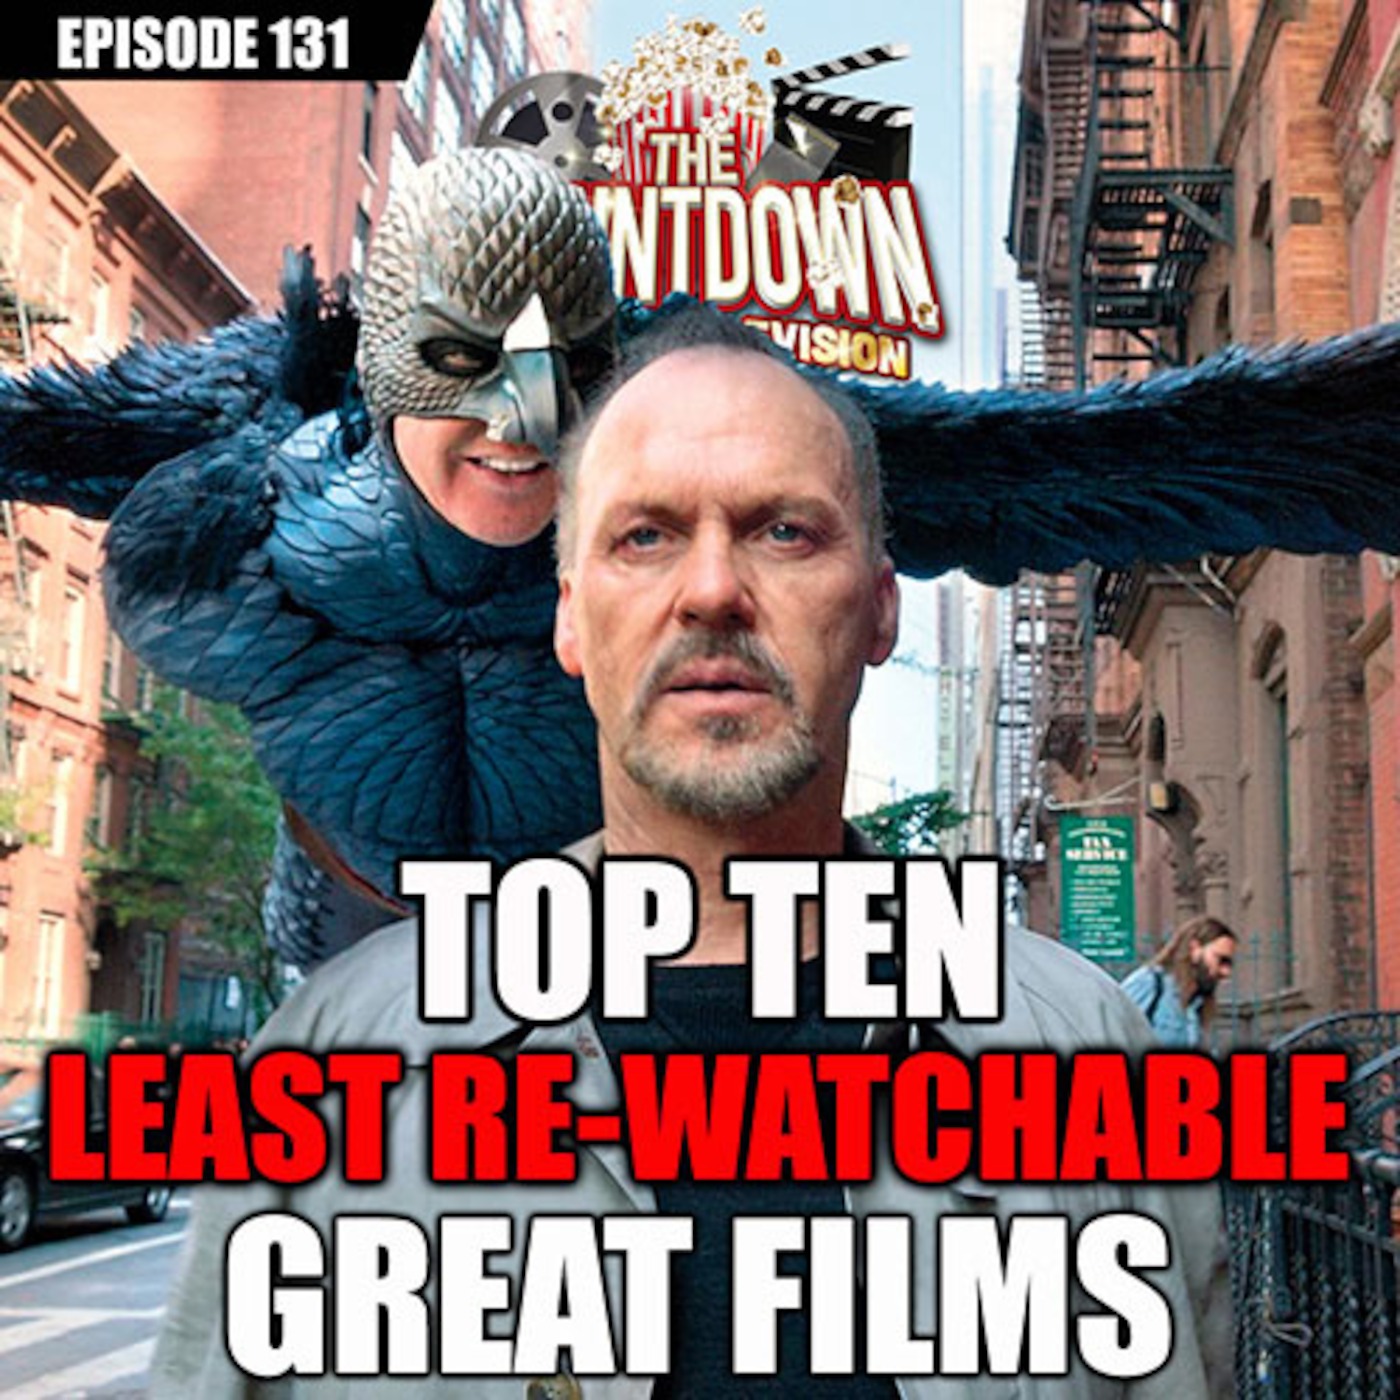 Episode 131: Top 10 Least Rewatchable Great Films